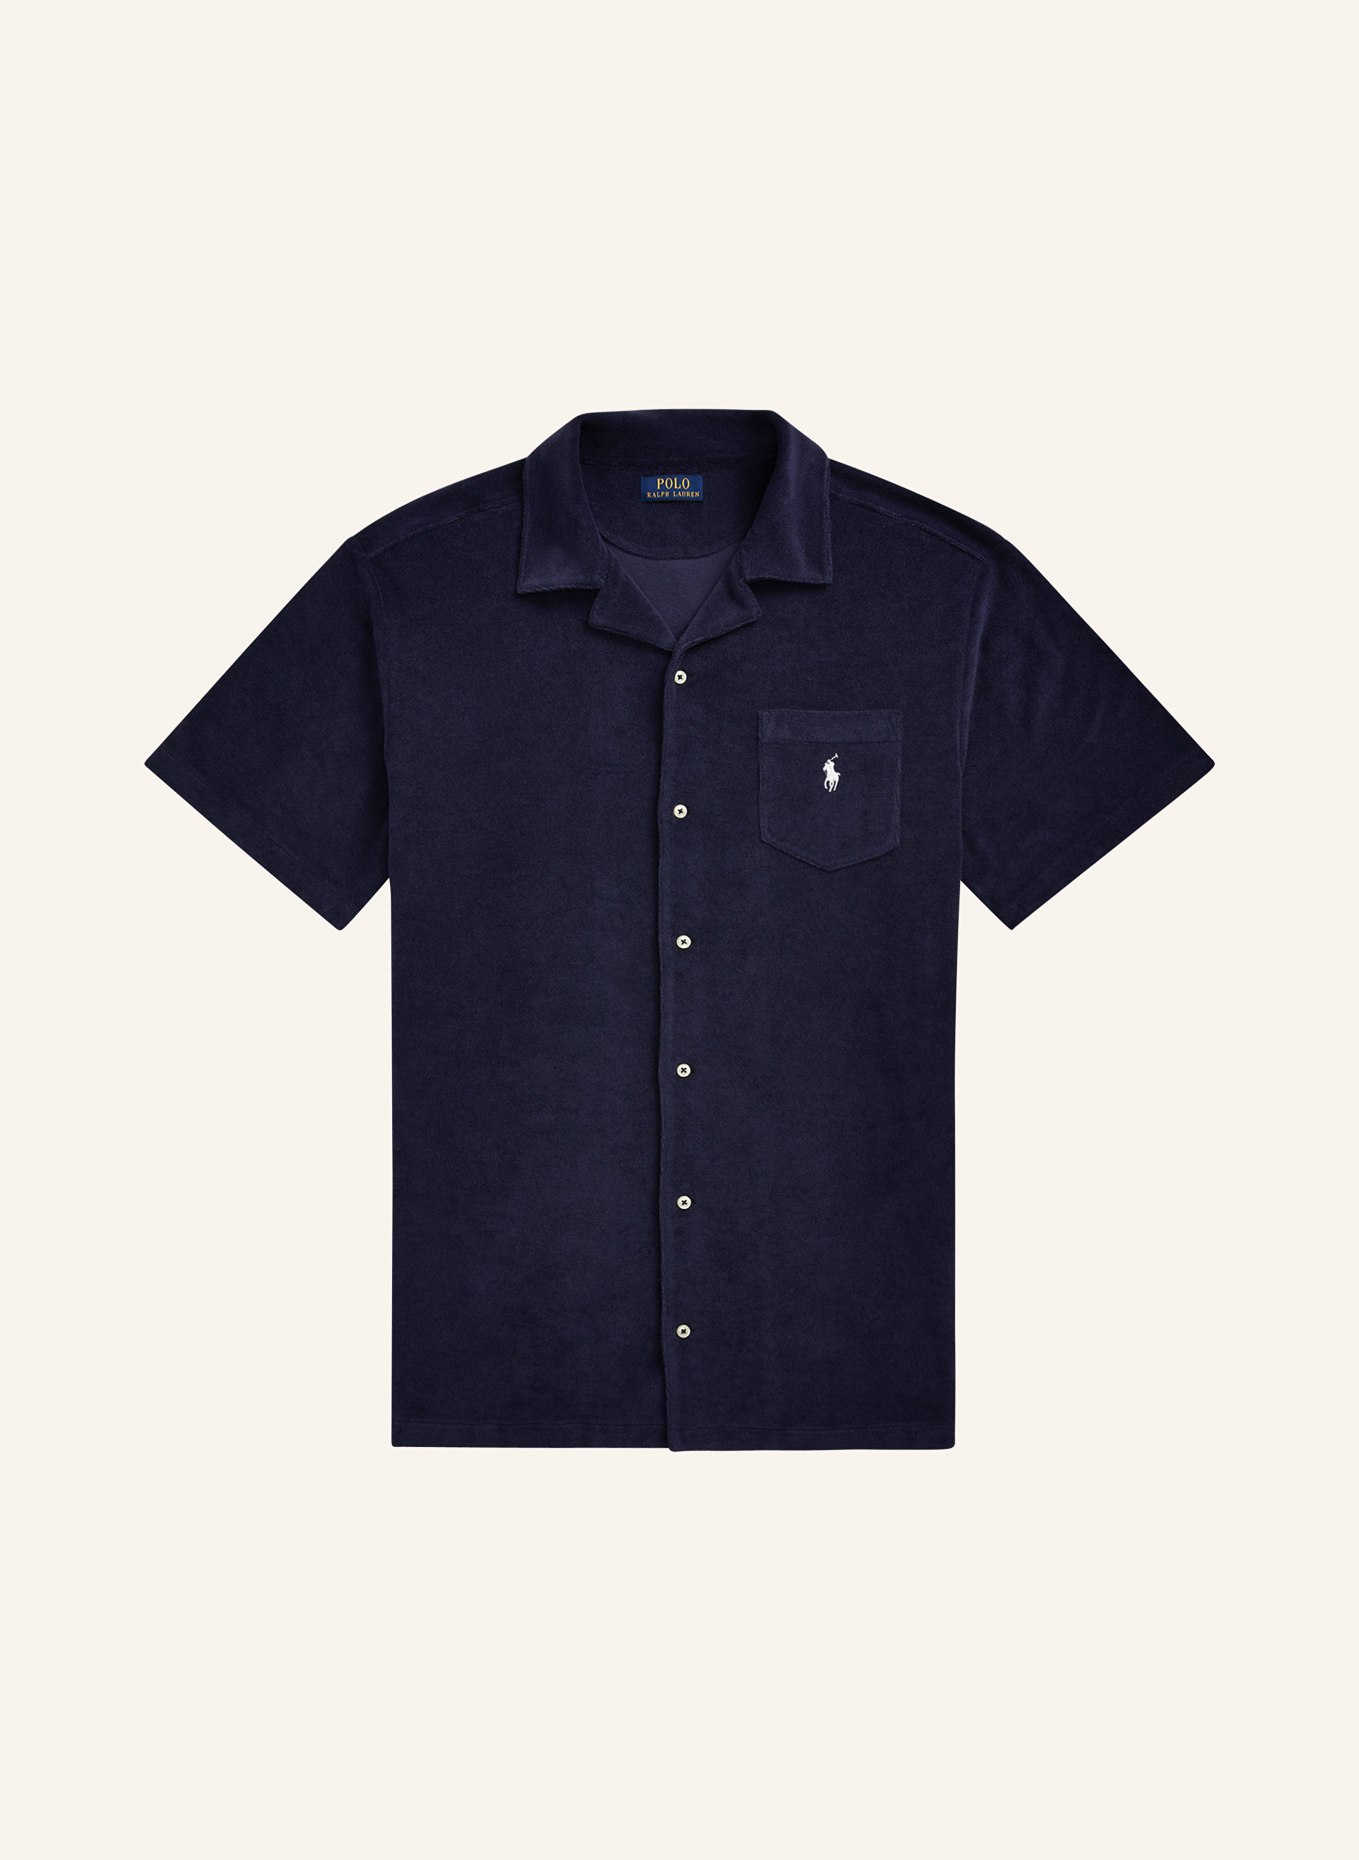 POLO RALPH LAUREN Big & Tall Short sleeve shirt comfort fit made of terry cloth, Color: DARK BLUE (Image 1)